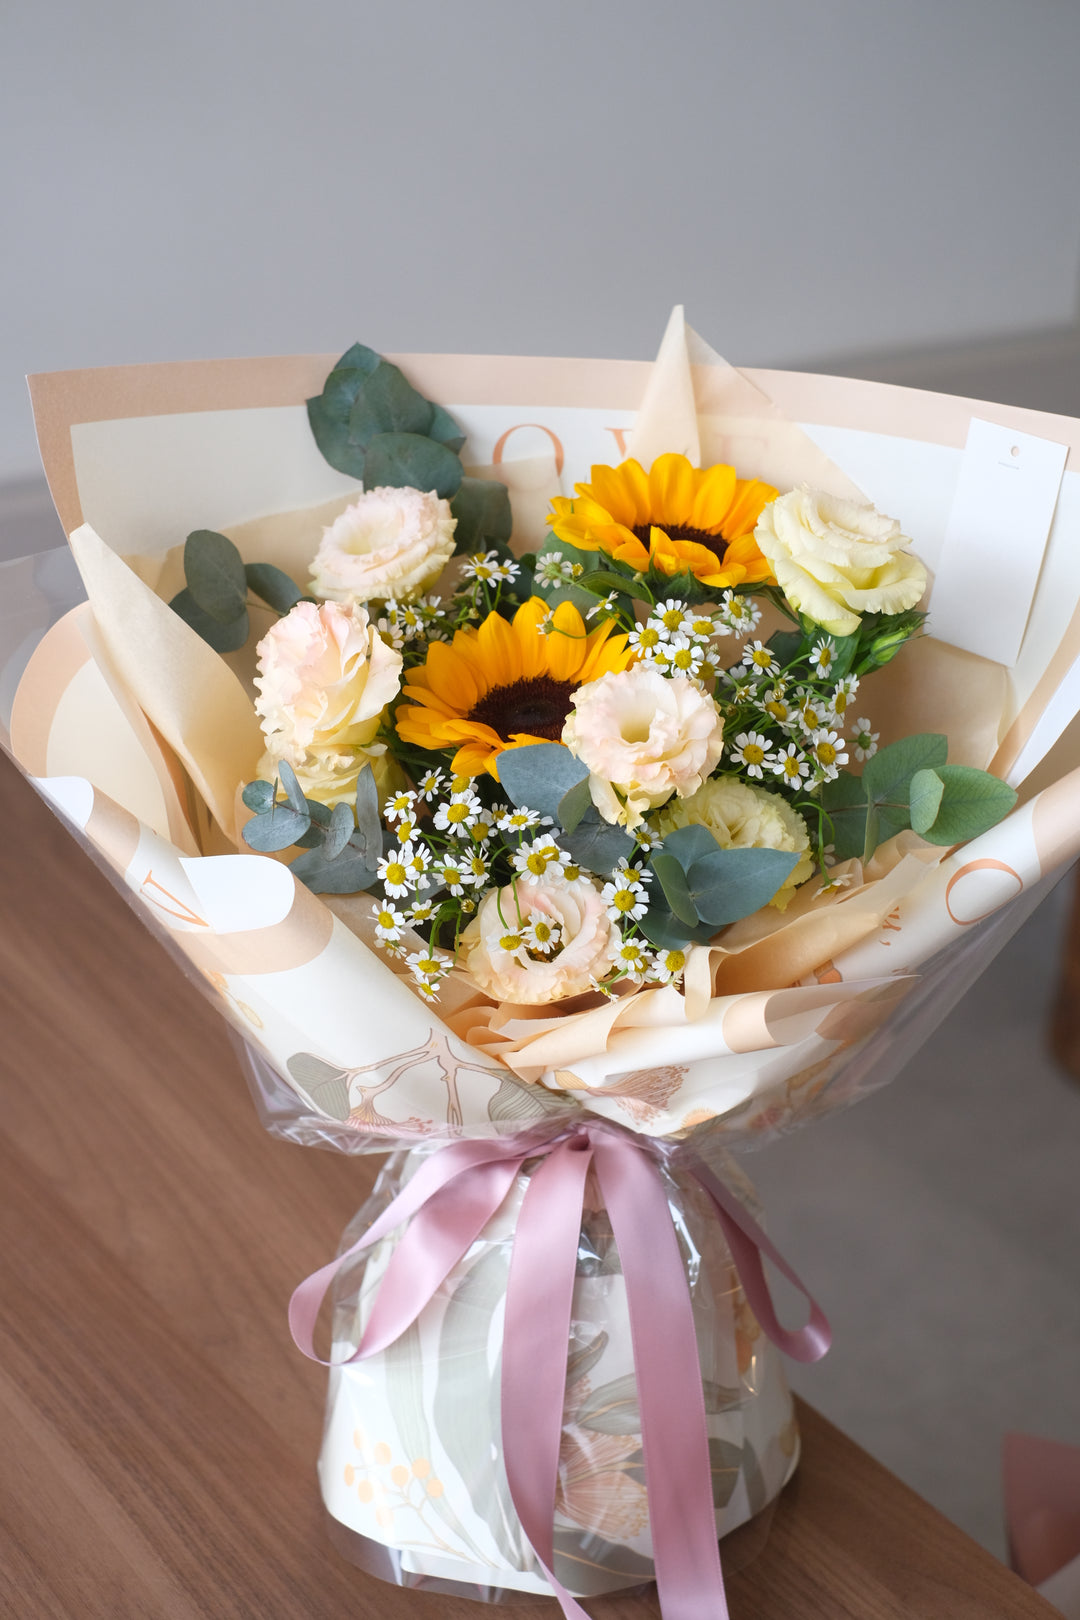 Send a message to someone special that they're the sunshine of your life with this explosion of sunny sunflowers with a hint of caramelized. This is an exuberant bouquet that will bring immense happiness into anybody's day!